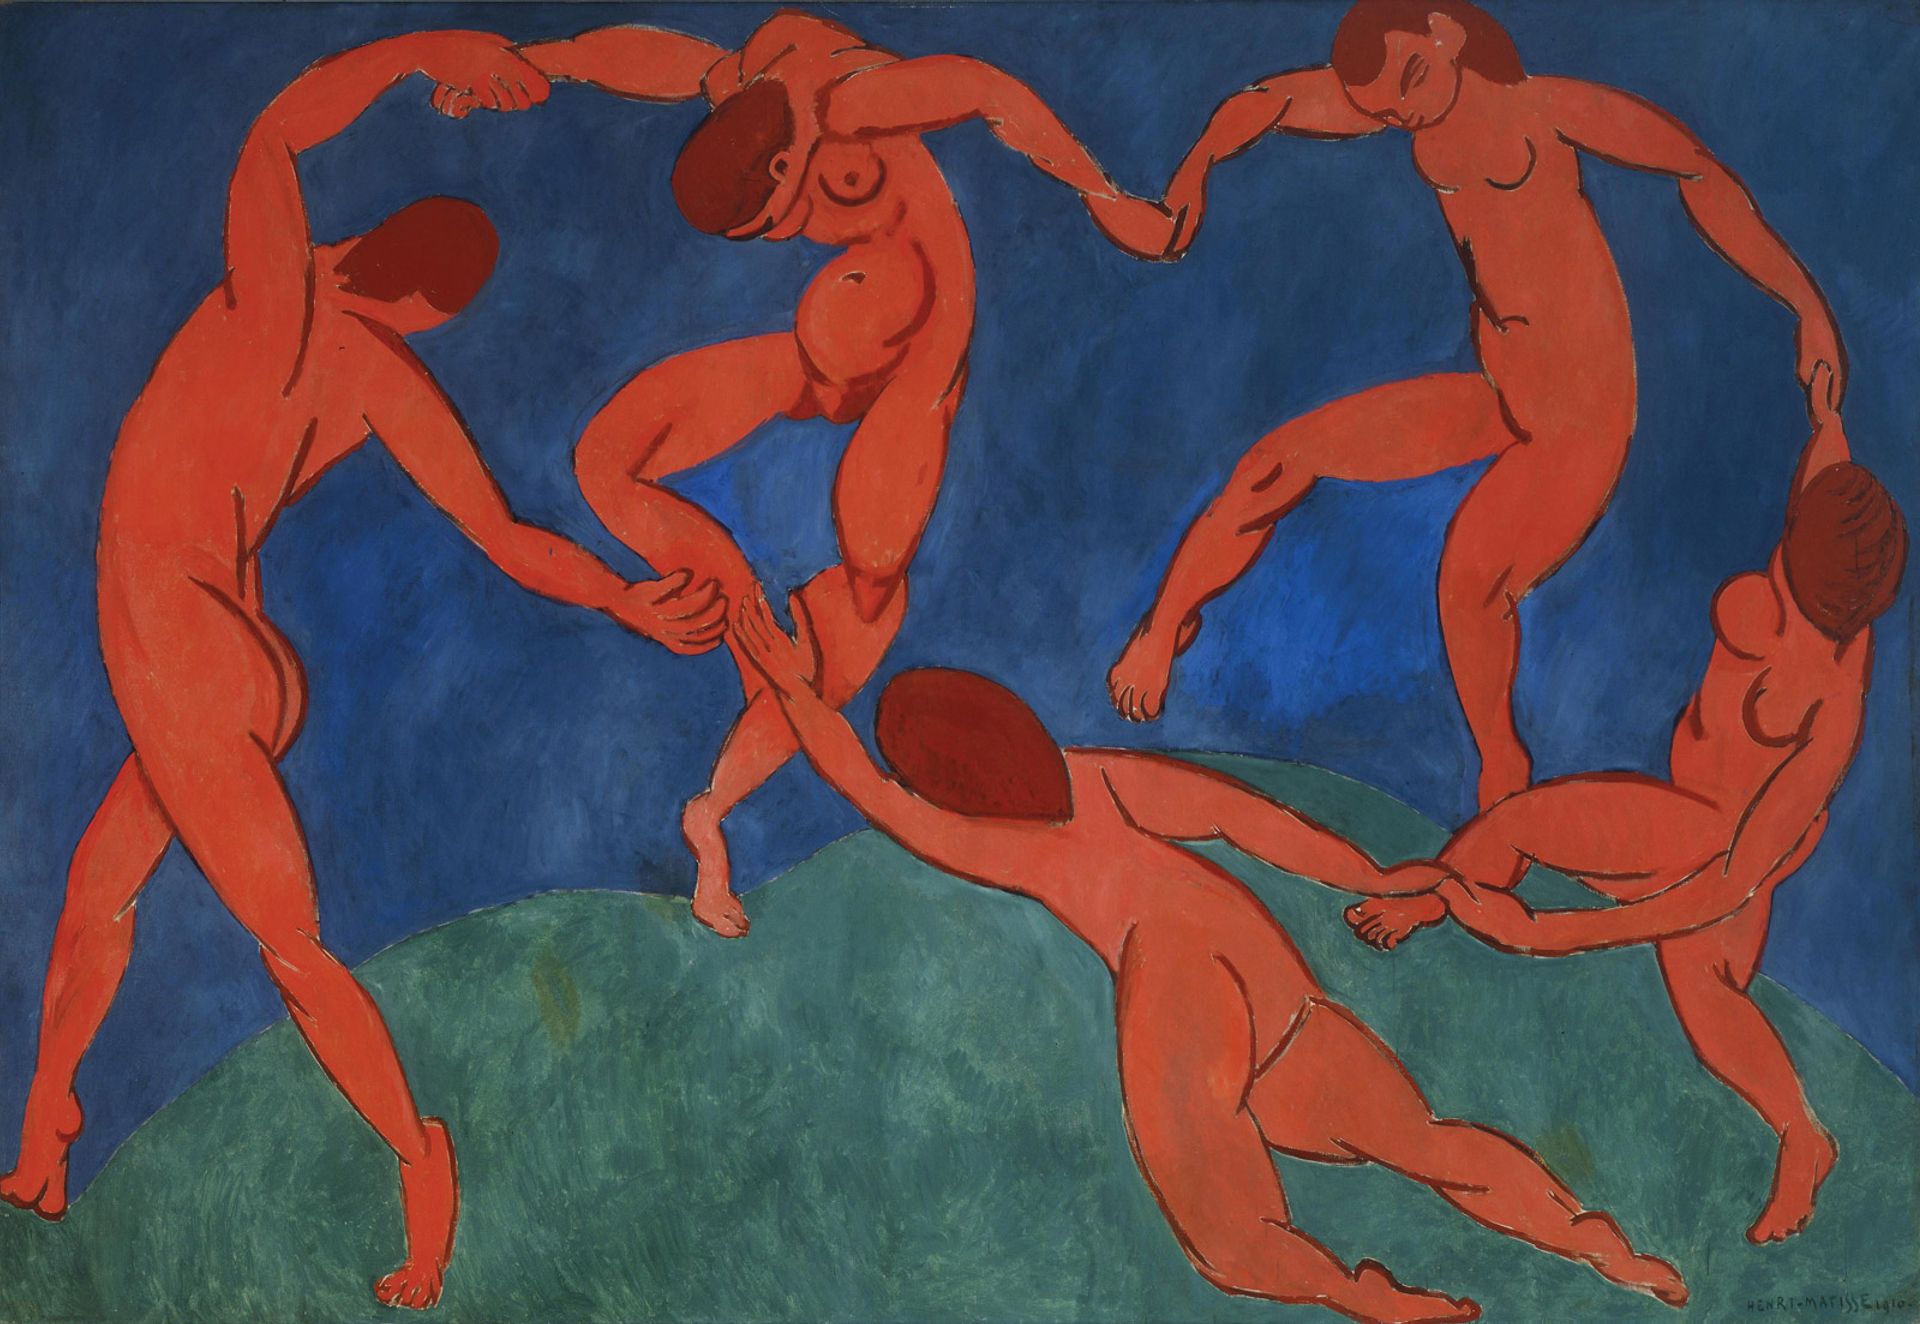 Sergei Shchukin’s collection included Henri Matisse’s The Dance (1909-10), which will appear in the Pushkin’s exhibition in June as an exceptional loan from the Hermitage © Succession Henri Matisse/DACS 2019